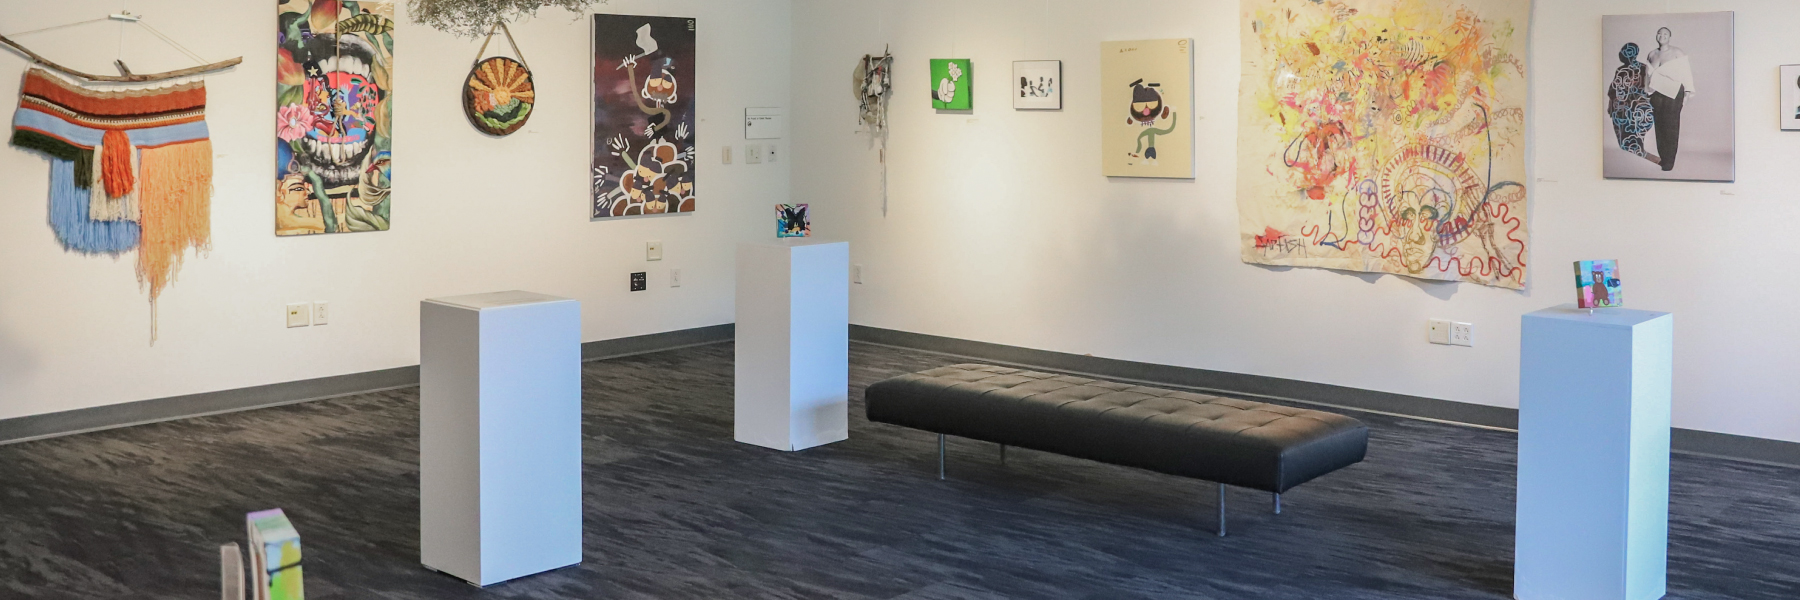 A recent exhibit in the cultural arts gallery in the campus center.